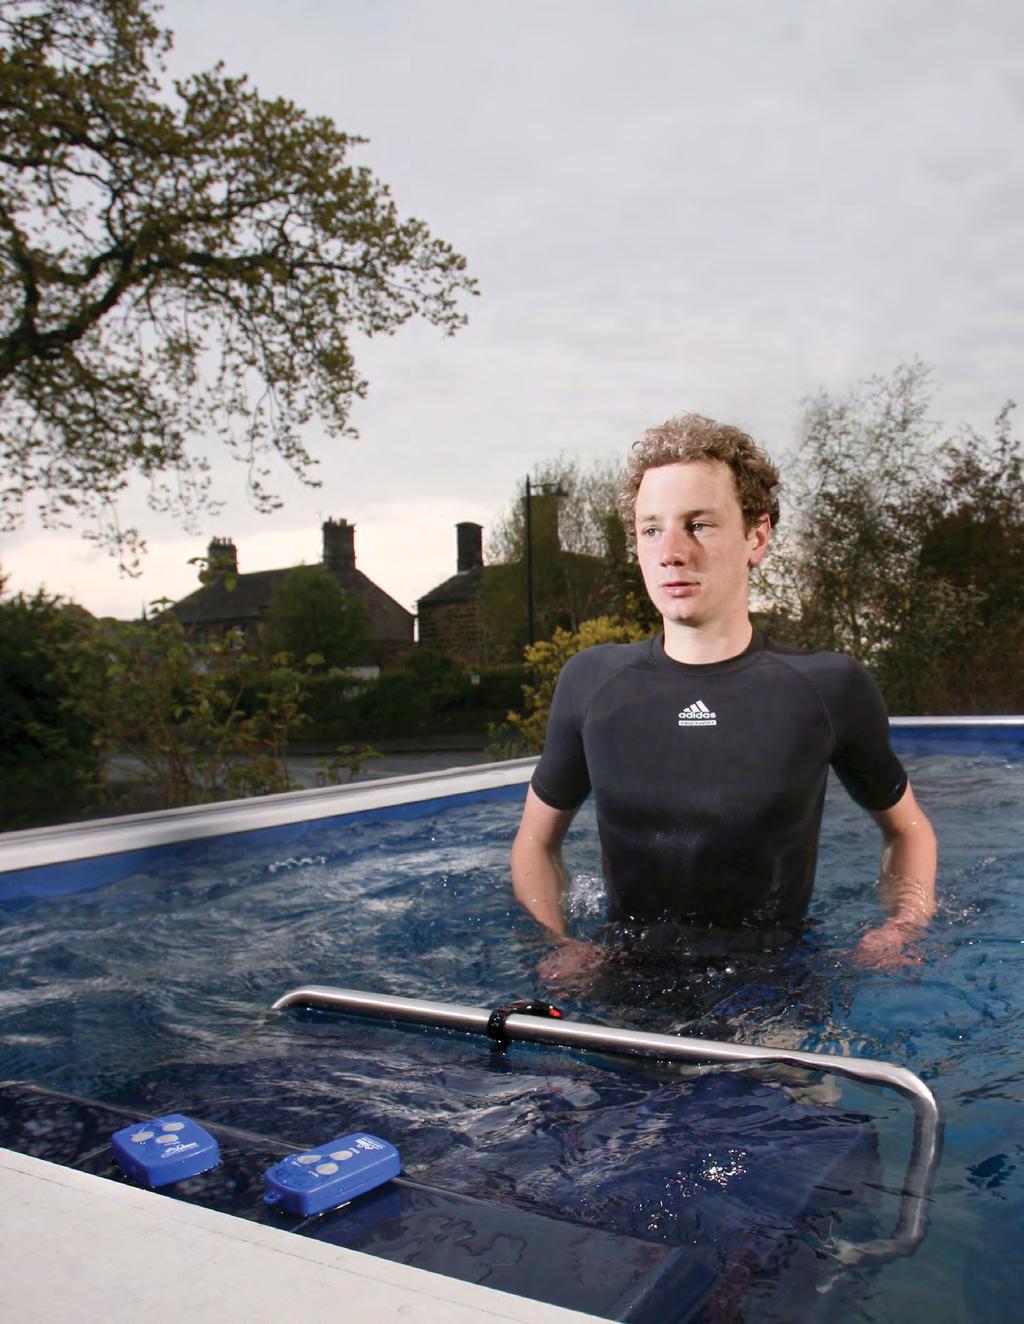 Treadmill Case Study Olympic Gold Medalist Alistair Brownlee From an Achilles tendon tear in February to Olympic Gold in August that s the road British triathlete Alistair Brownlee traveled in 2012.